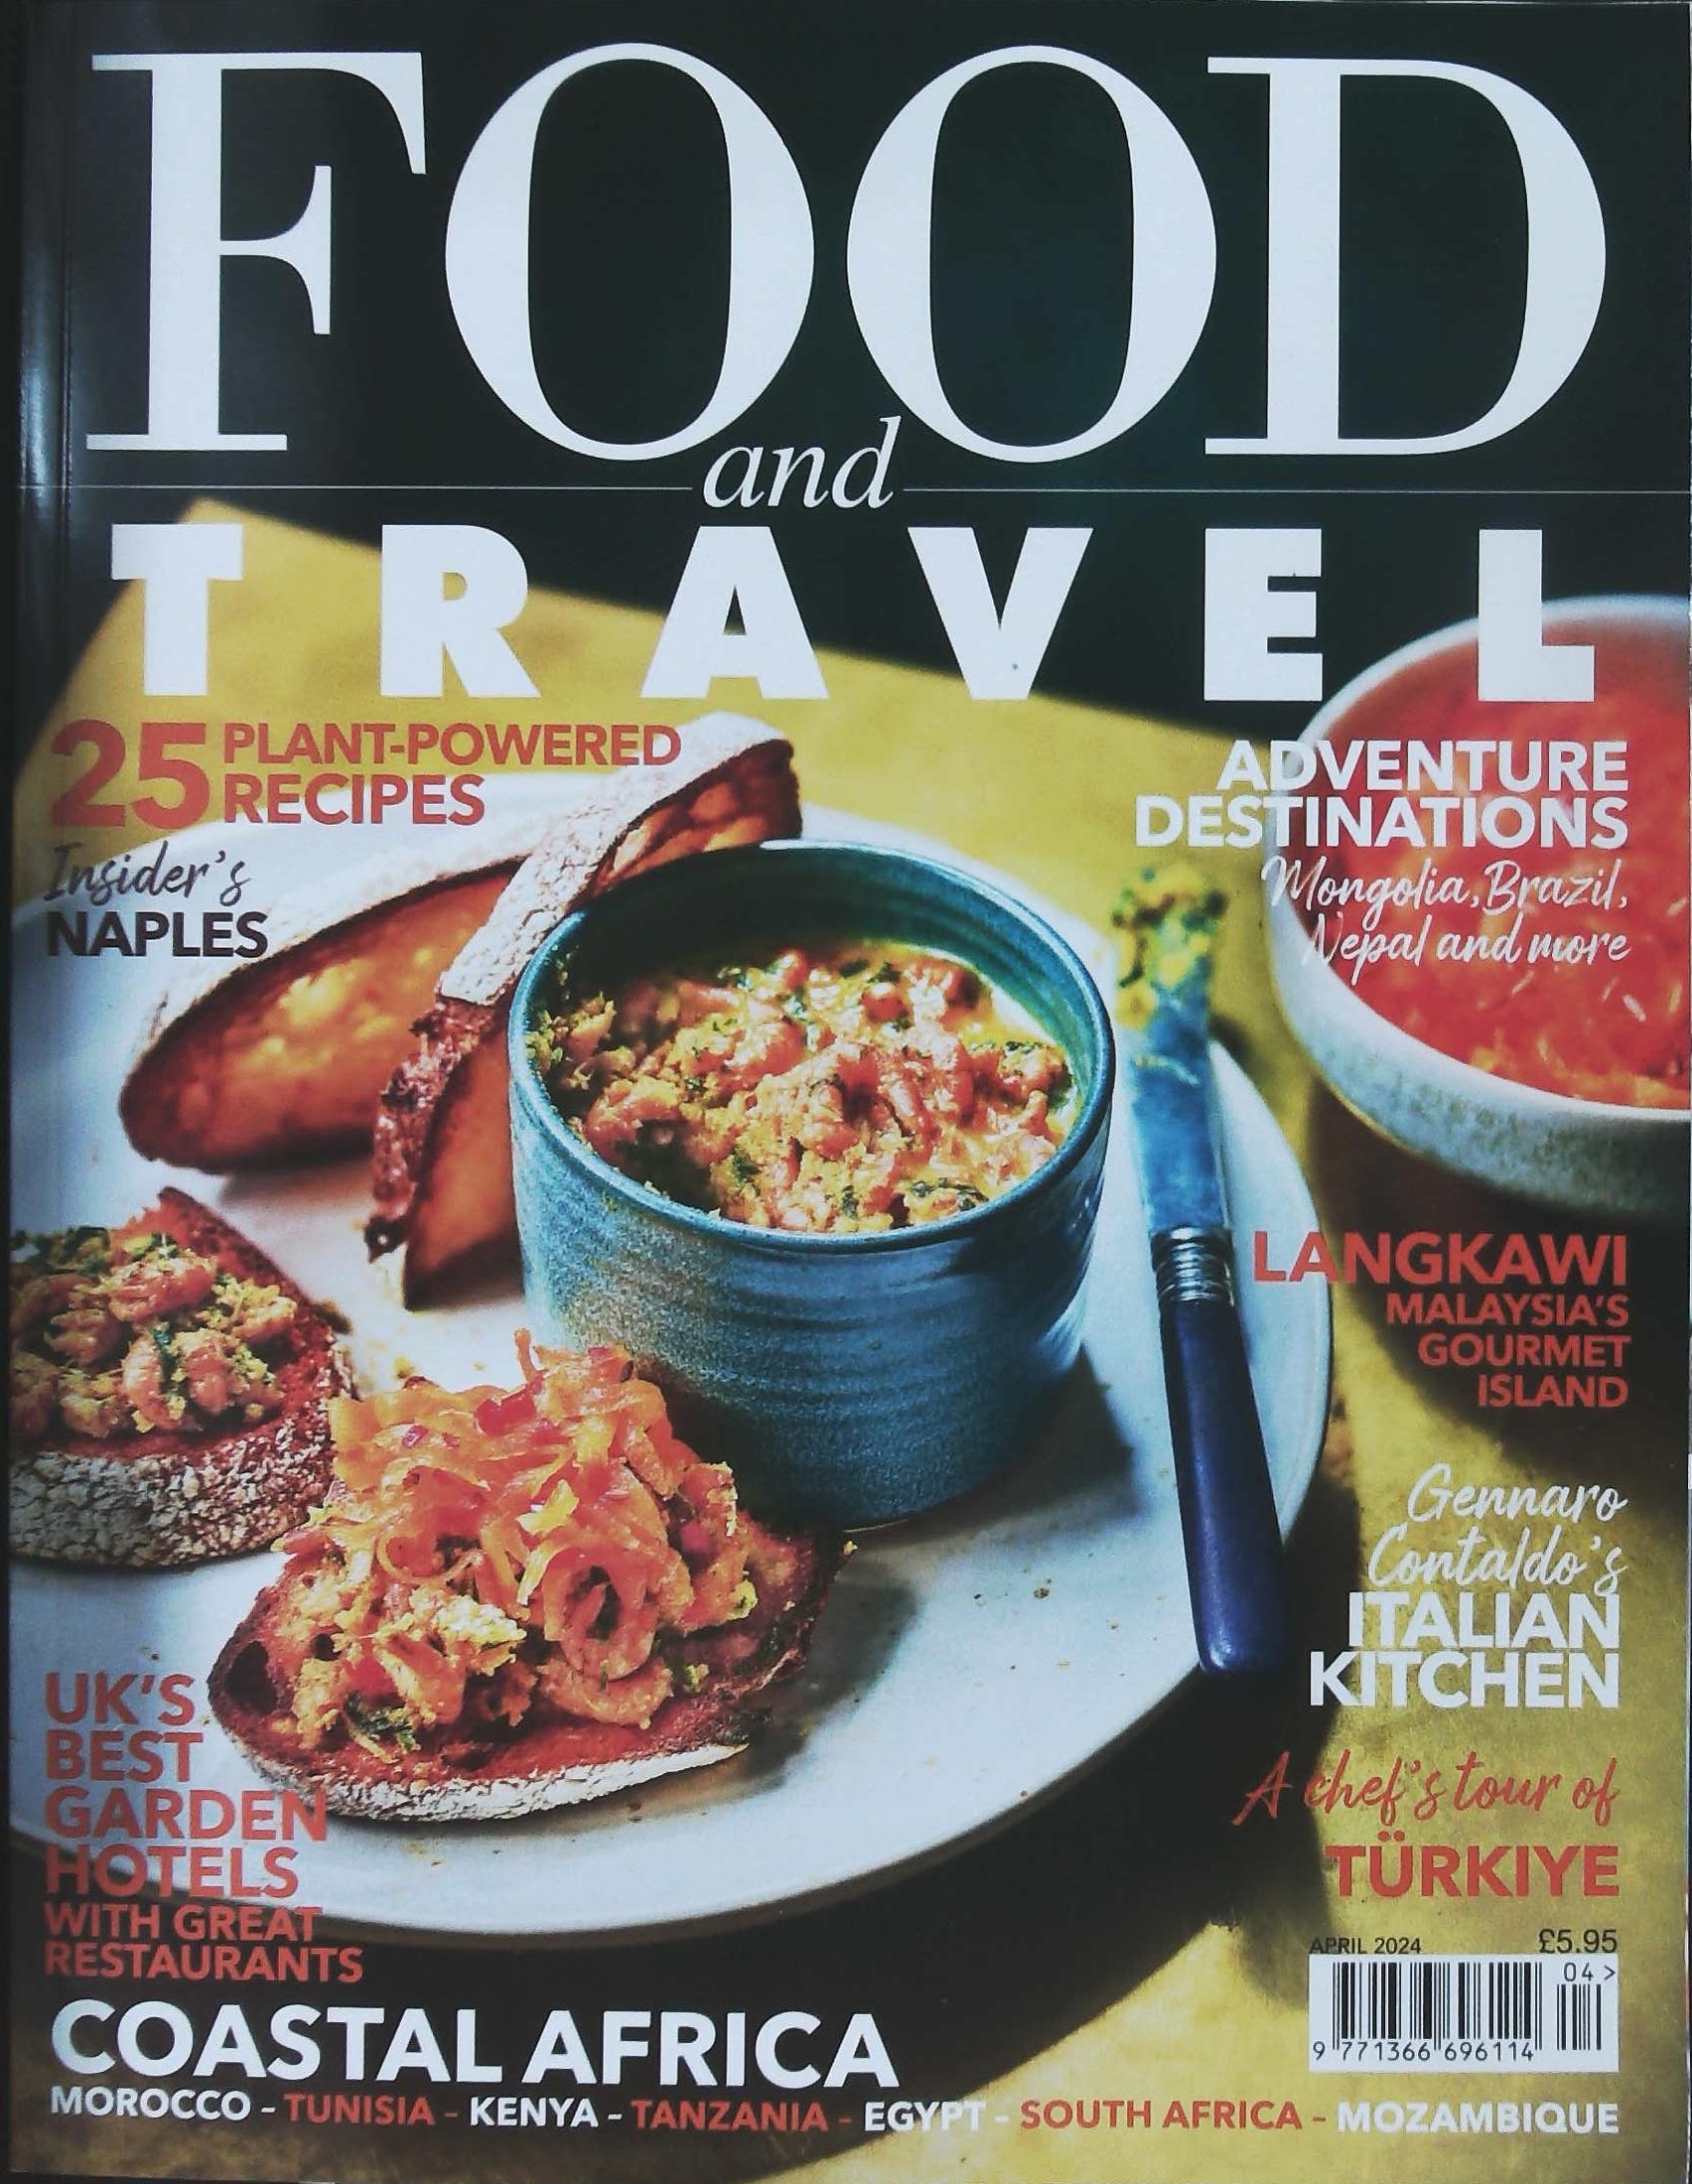 FOOD AND TRAVEL